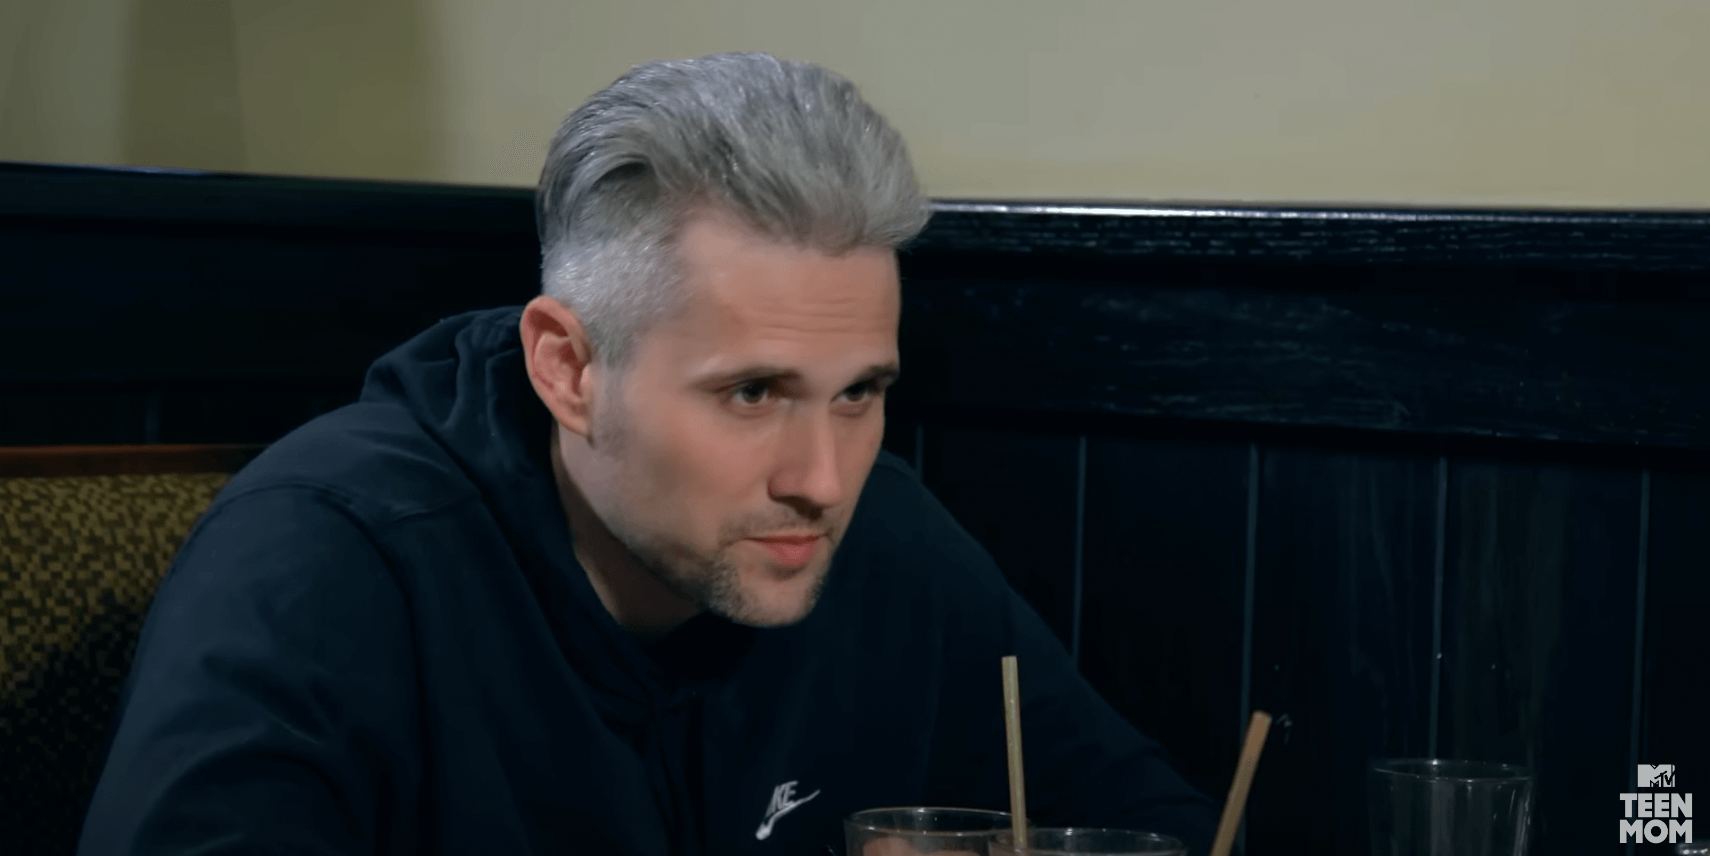 Ryan Edwards leans forward in a black top while filming in 'Teen Mom: The Next Chapter' Season 2